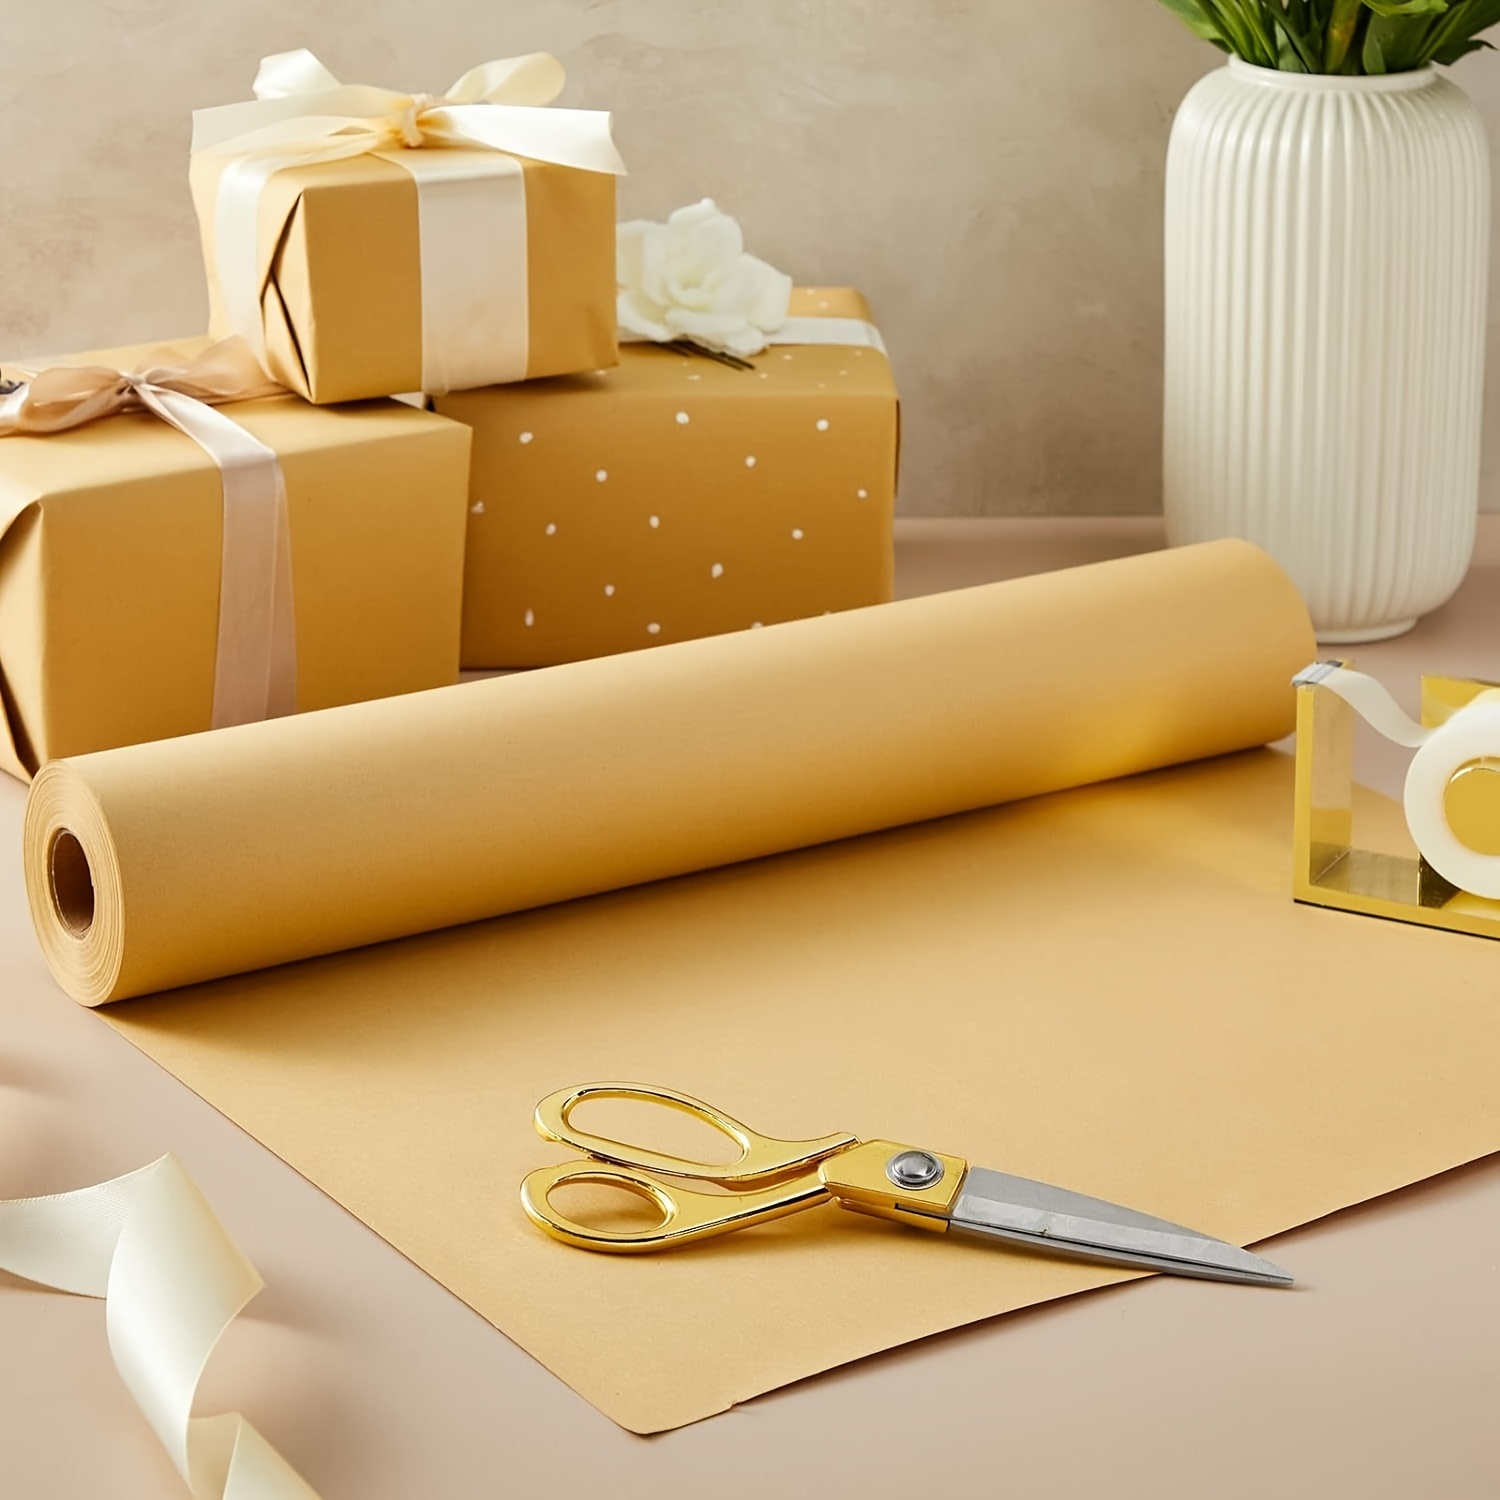 Kraft Paper Roll, Plain Brown Shipping Paper For Gift Wrapping